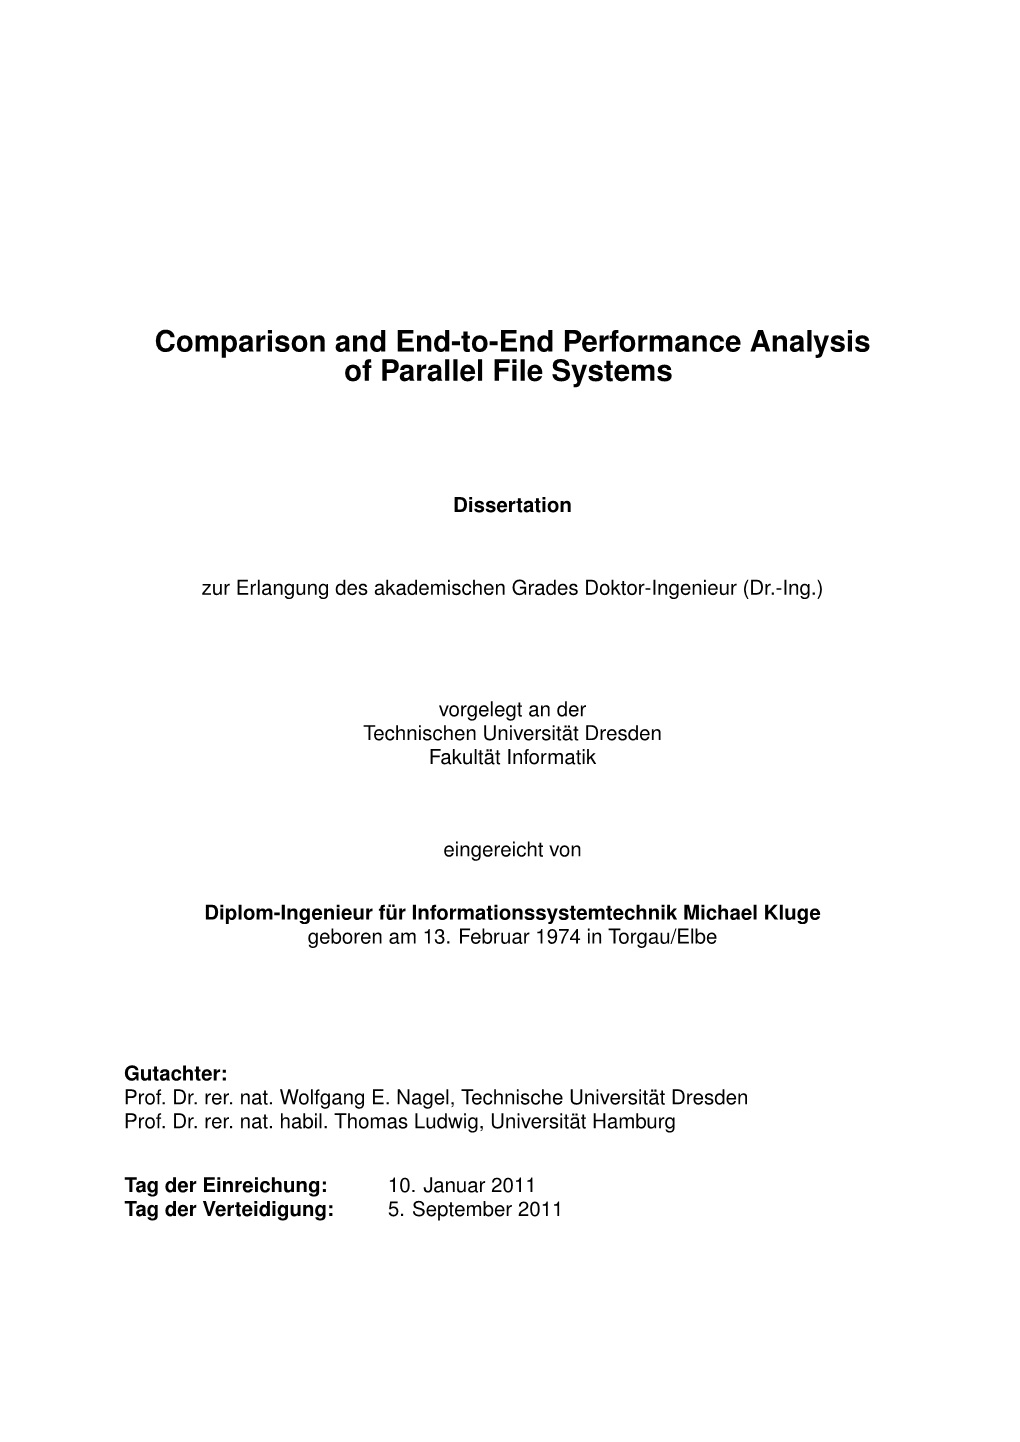 Comparison and End-To-End Performance Analysis of Parallel File Systems